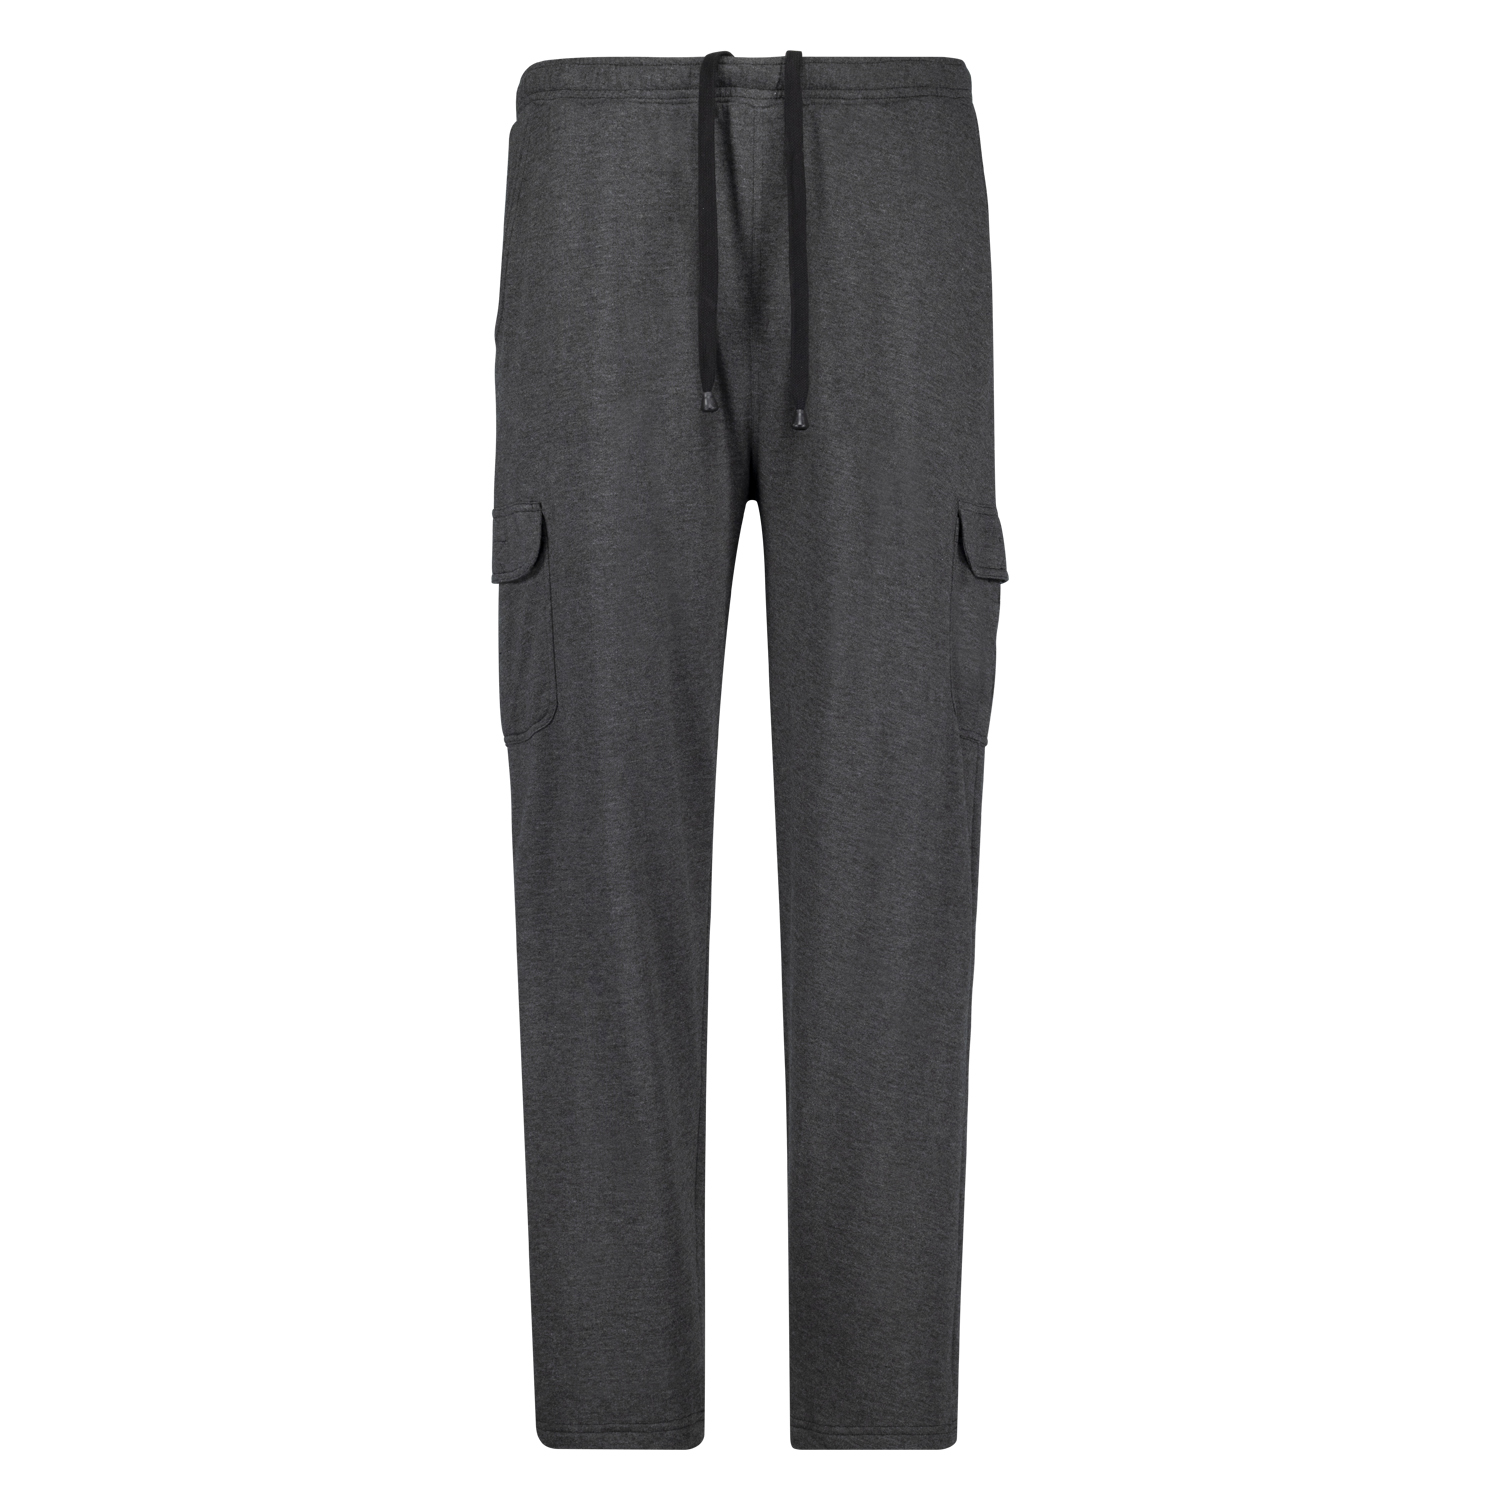 Cargo jogging pants in black for men by Adamo series "Athen" in oversizes up to 14XL